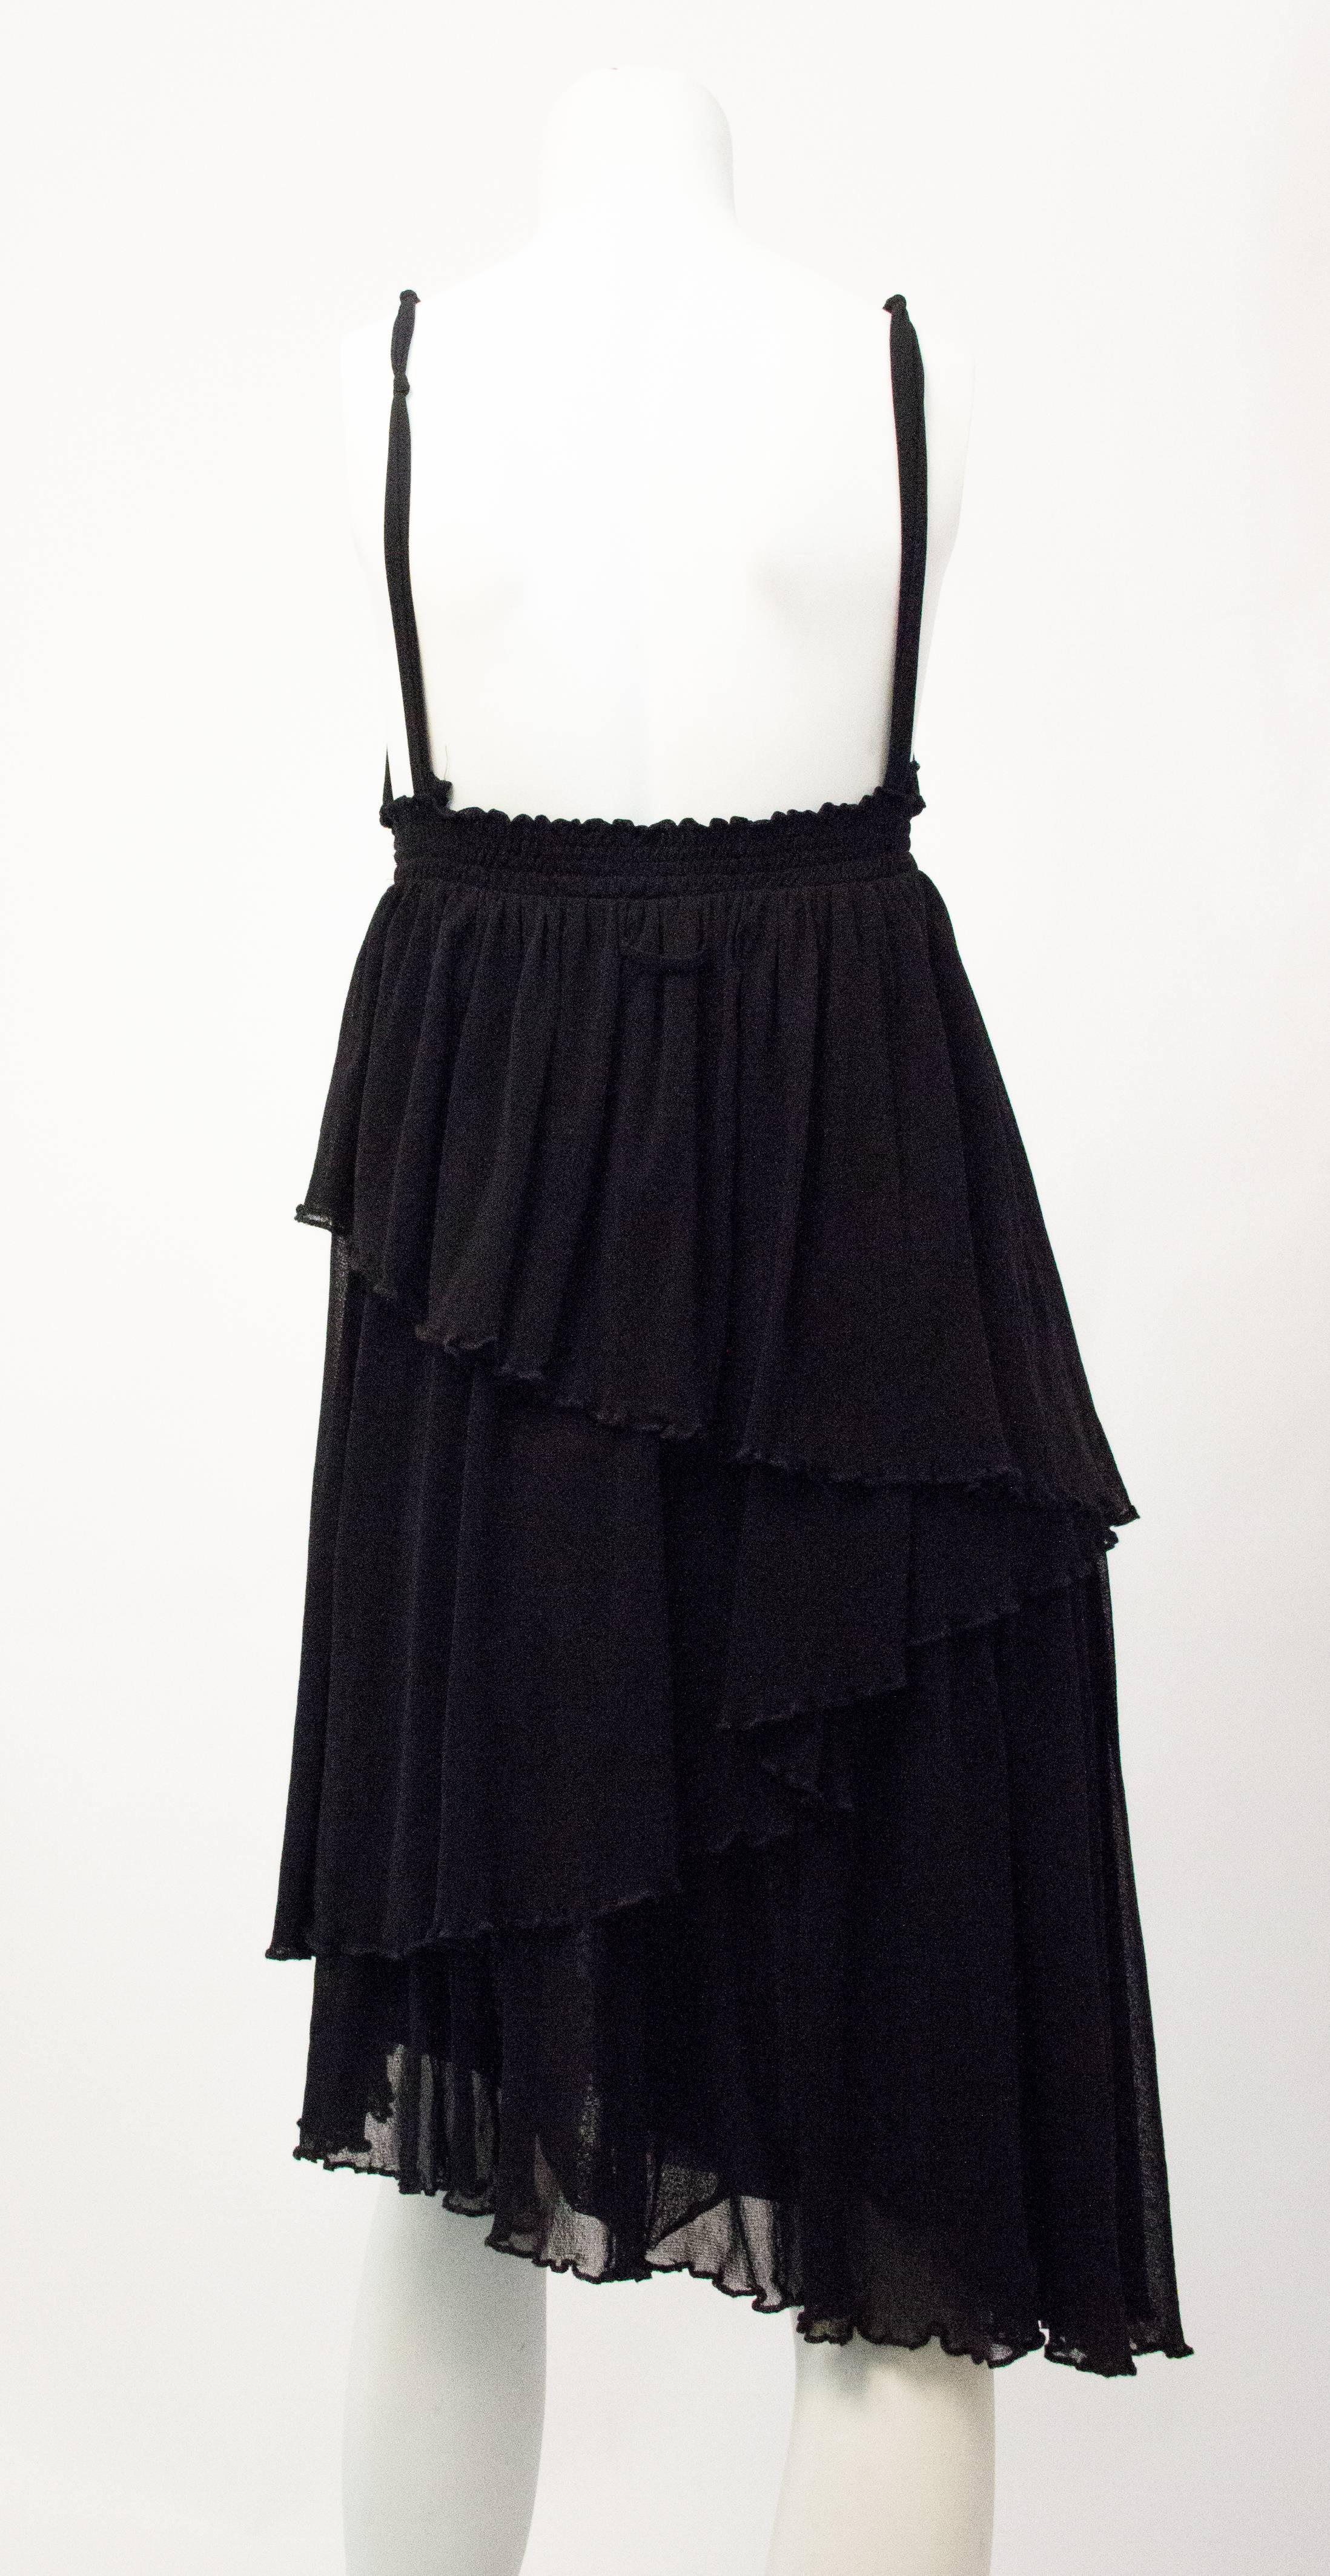 90s Jean Paul Gaultier black mesh tiered dress. Thin elastic band under bust. Fabric is stretchy. Original paper tags included. 